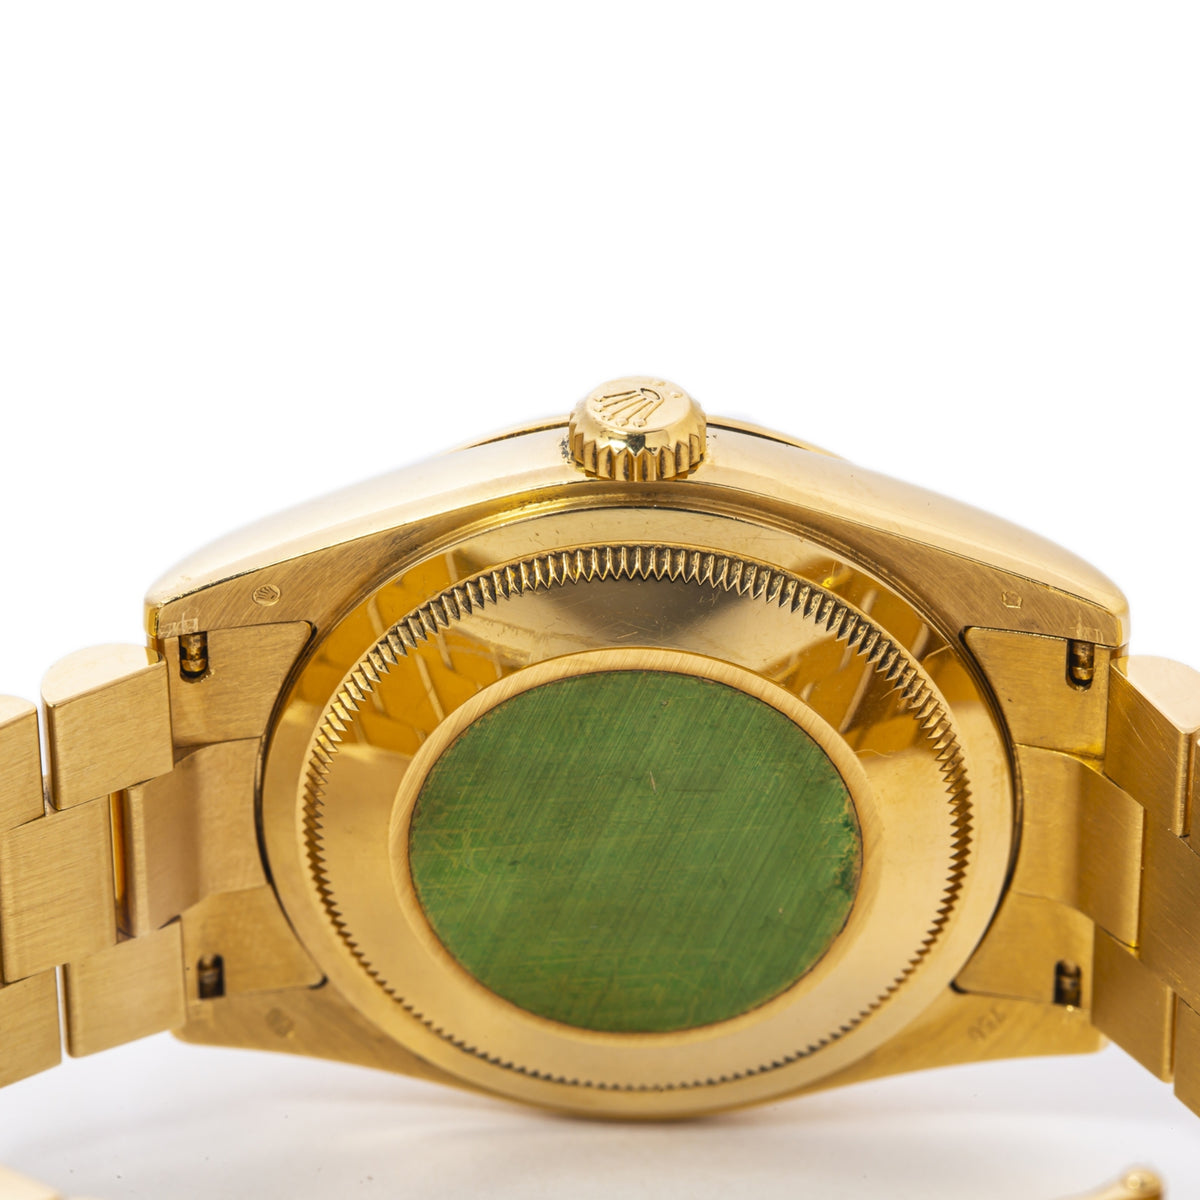 Rolex Day-Date 118238 18k Gold President Green Ombre Diamond Dial Watch 36mm